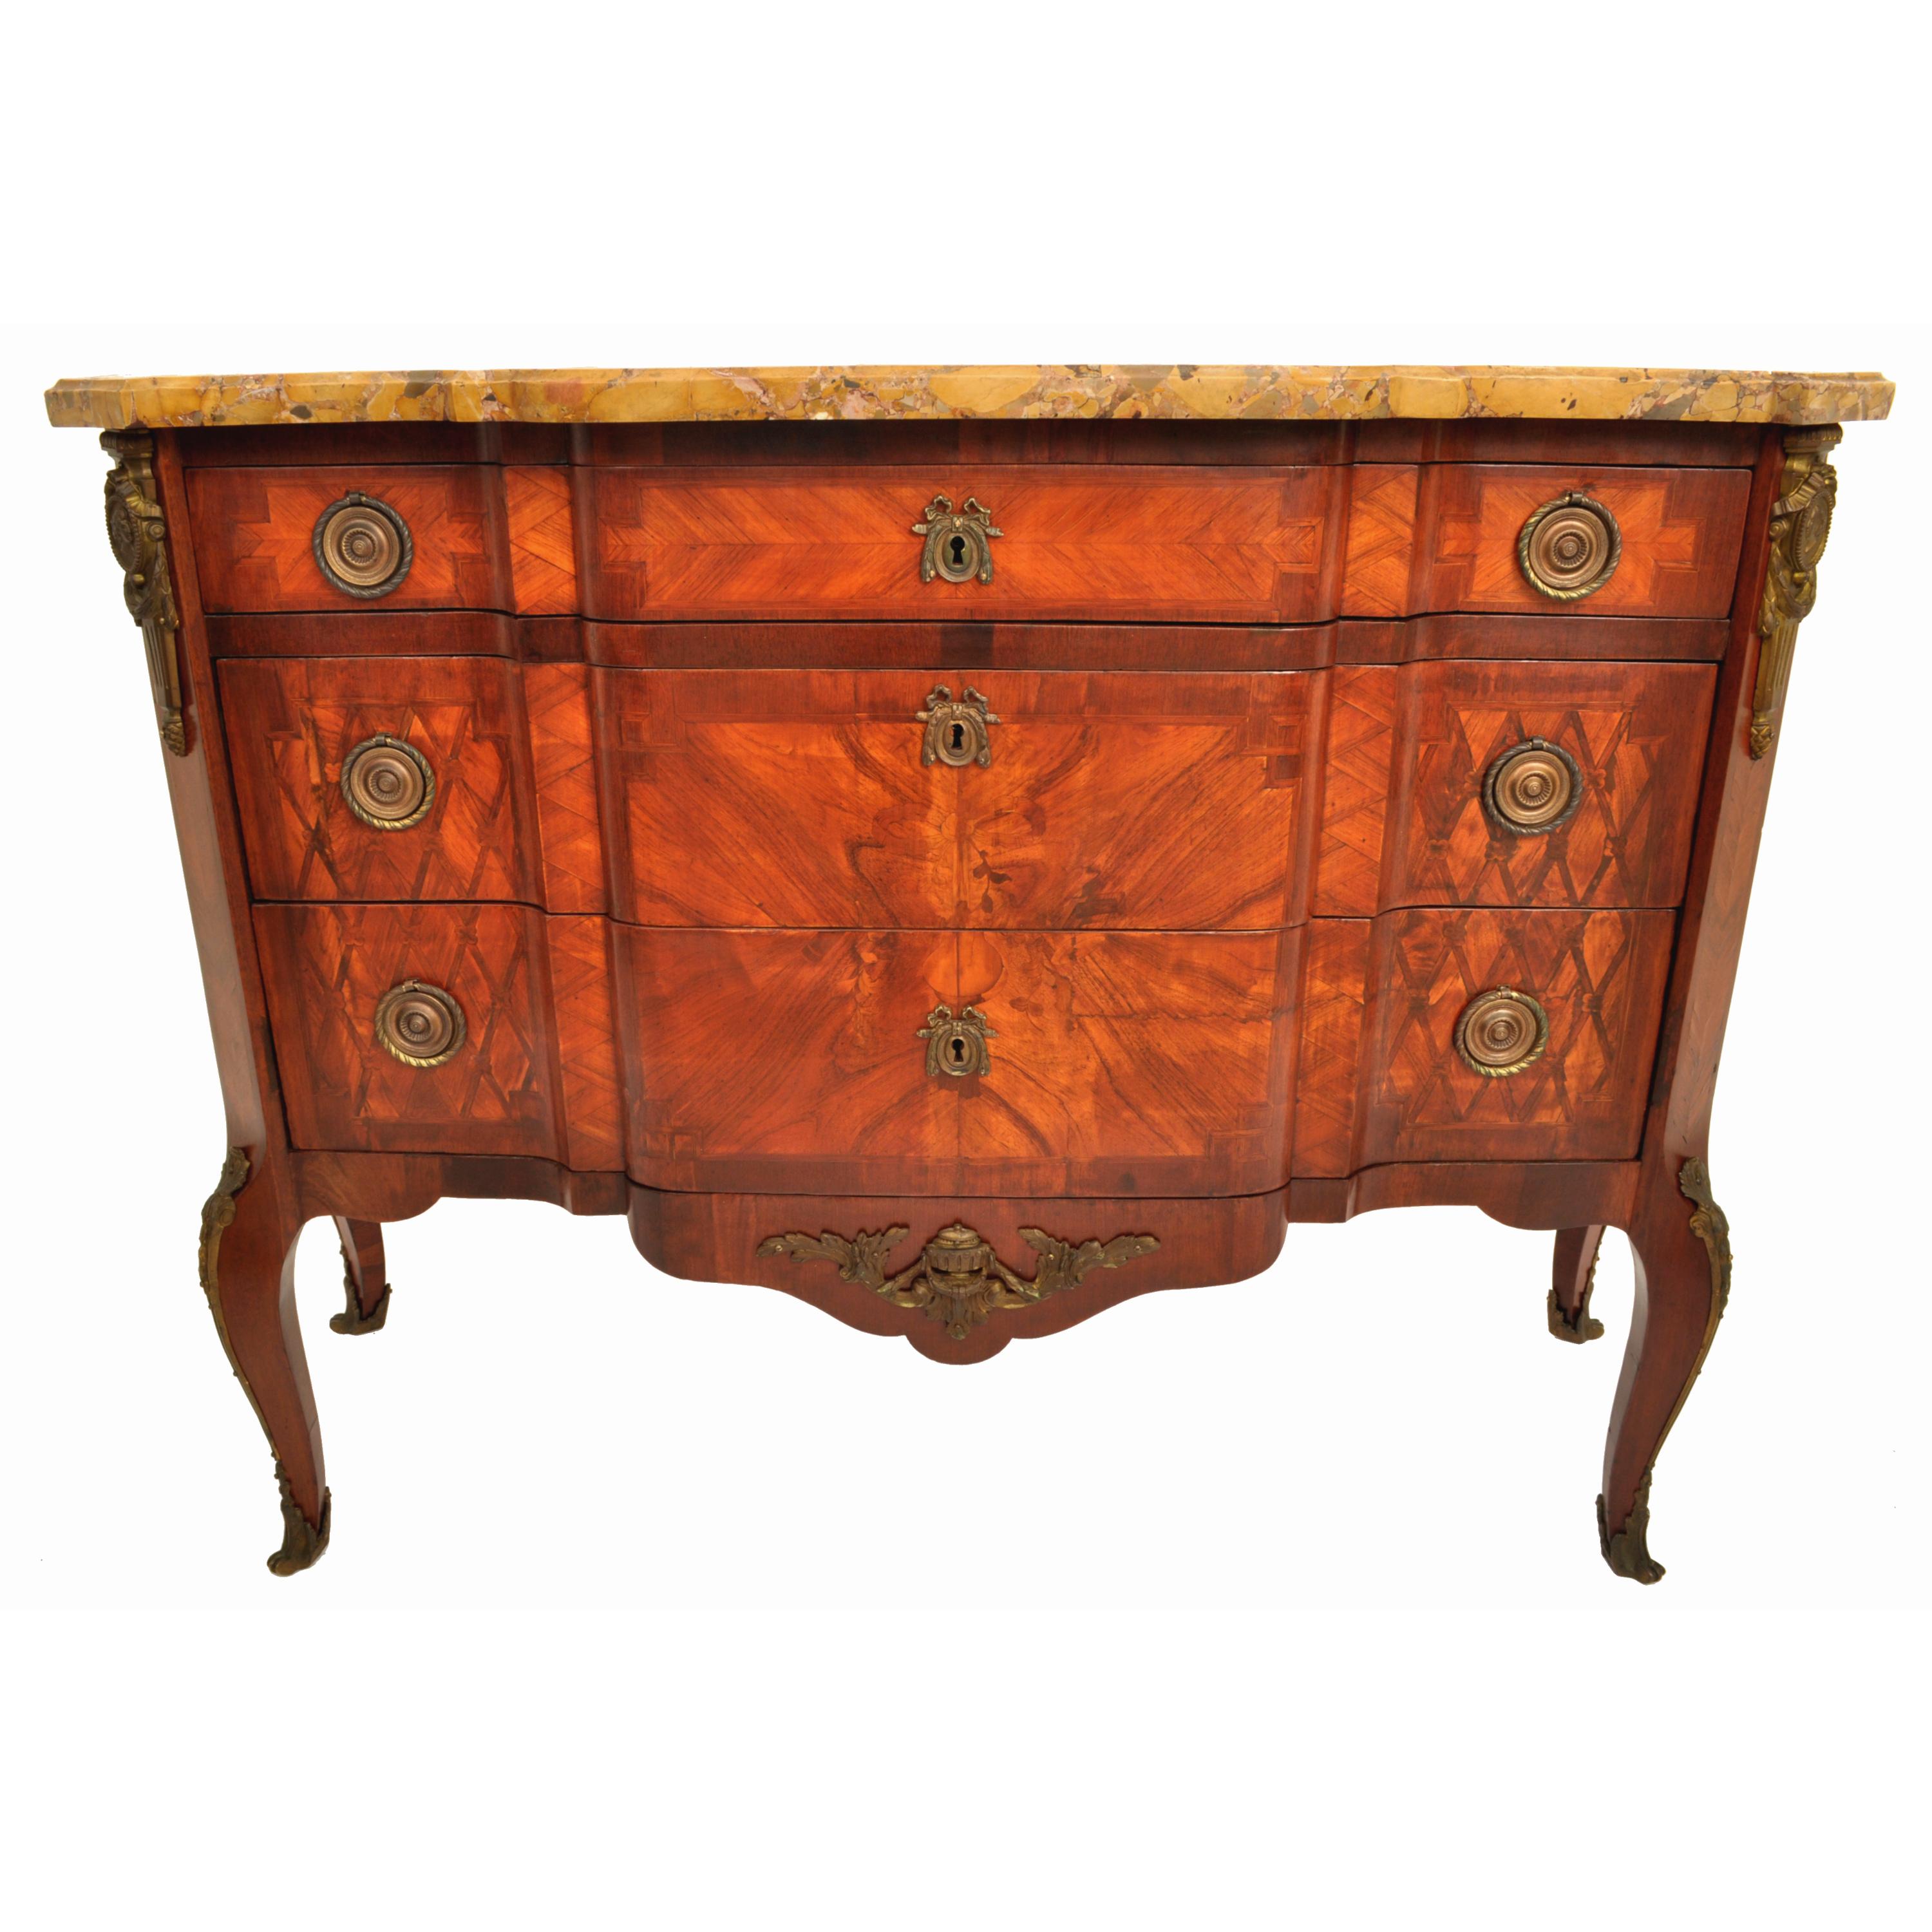 Gilt Antique French Louis XV Inlaid Parquetry Ormolu Marble Top Commode Chest, 1780